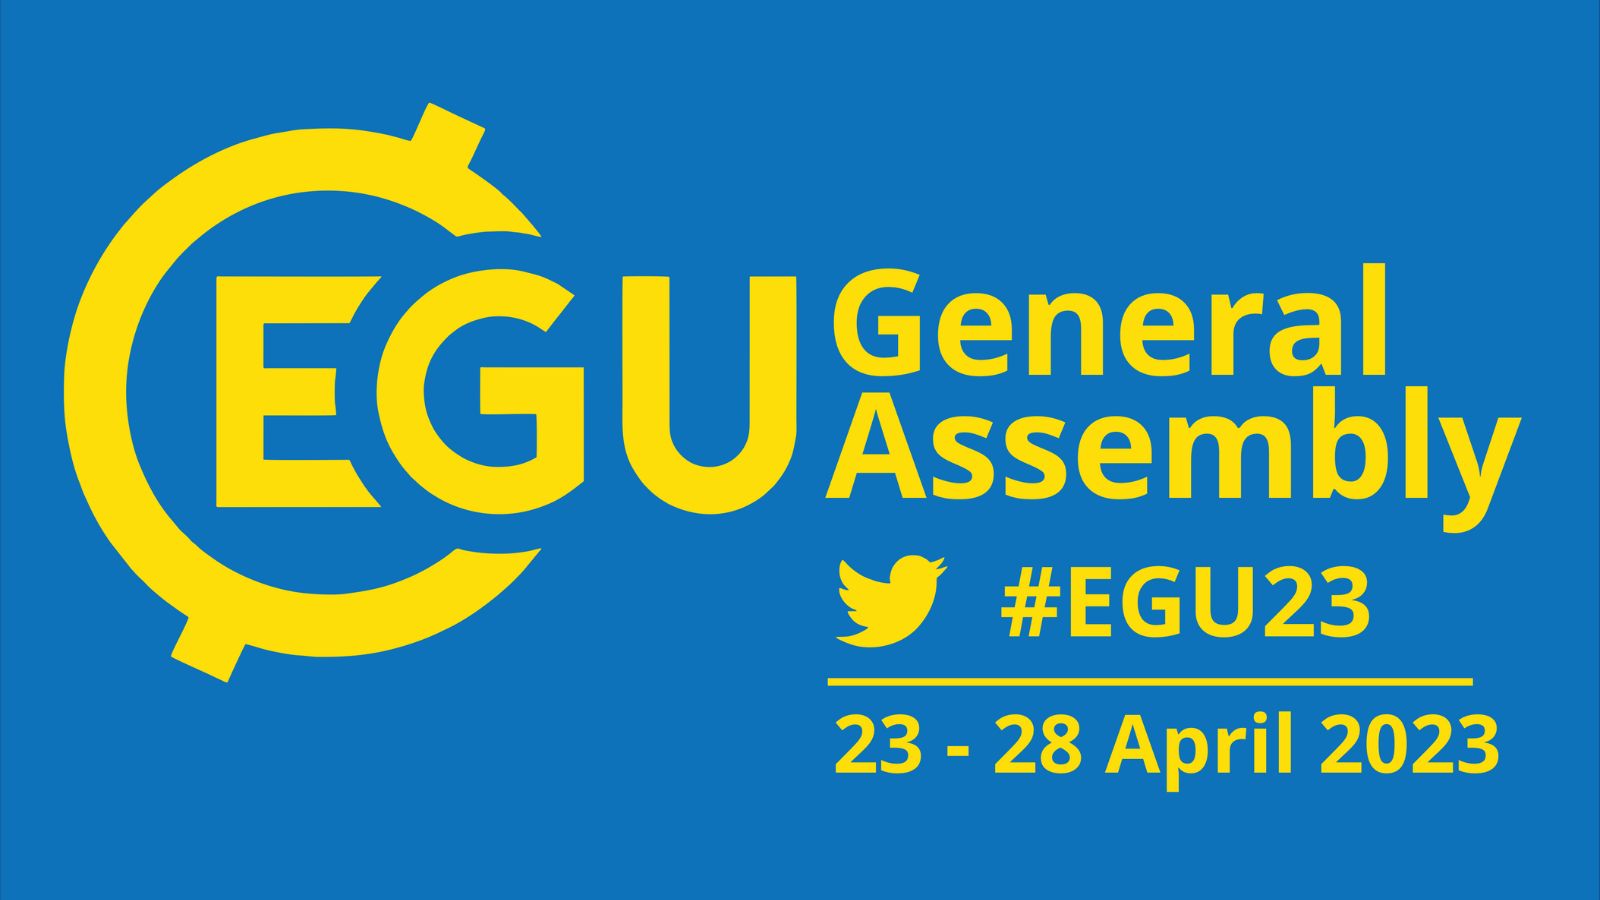 EGU General Assembly in 2023